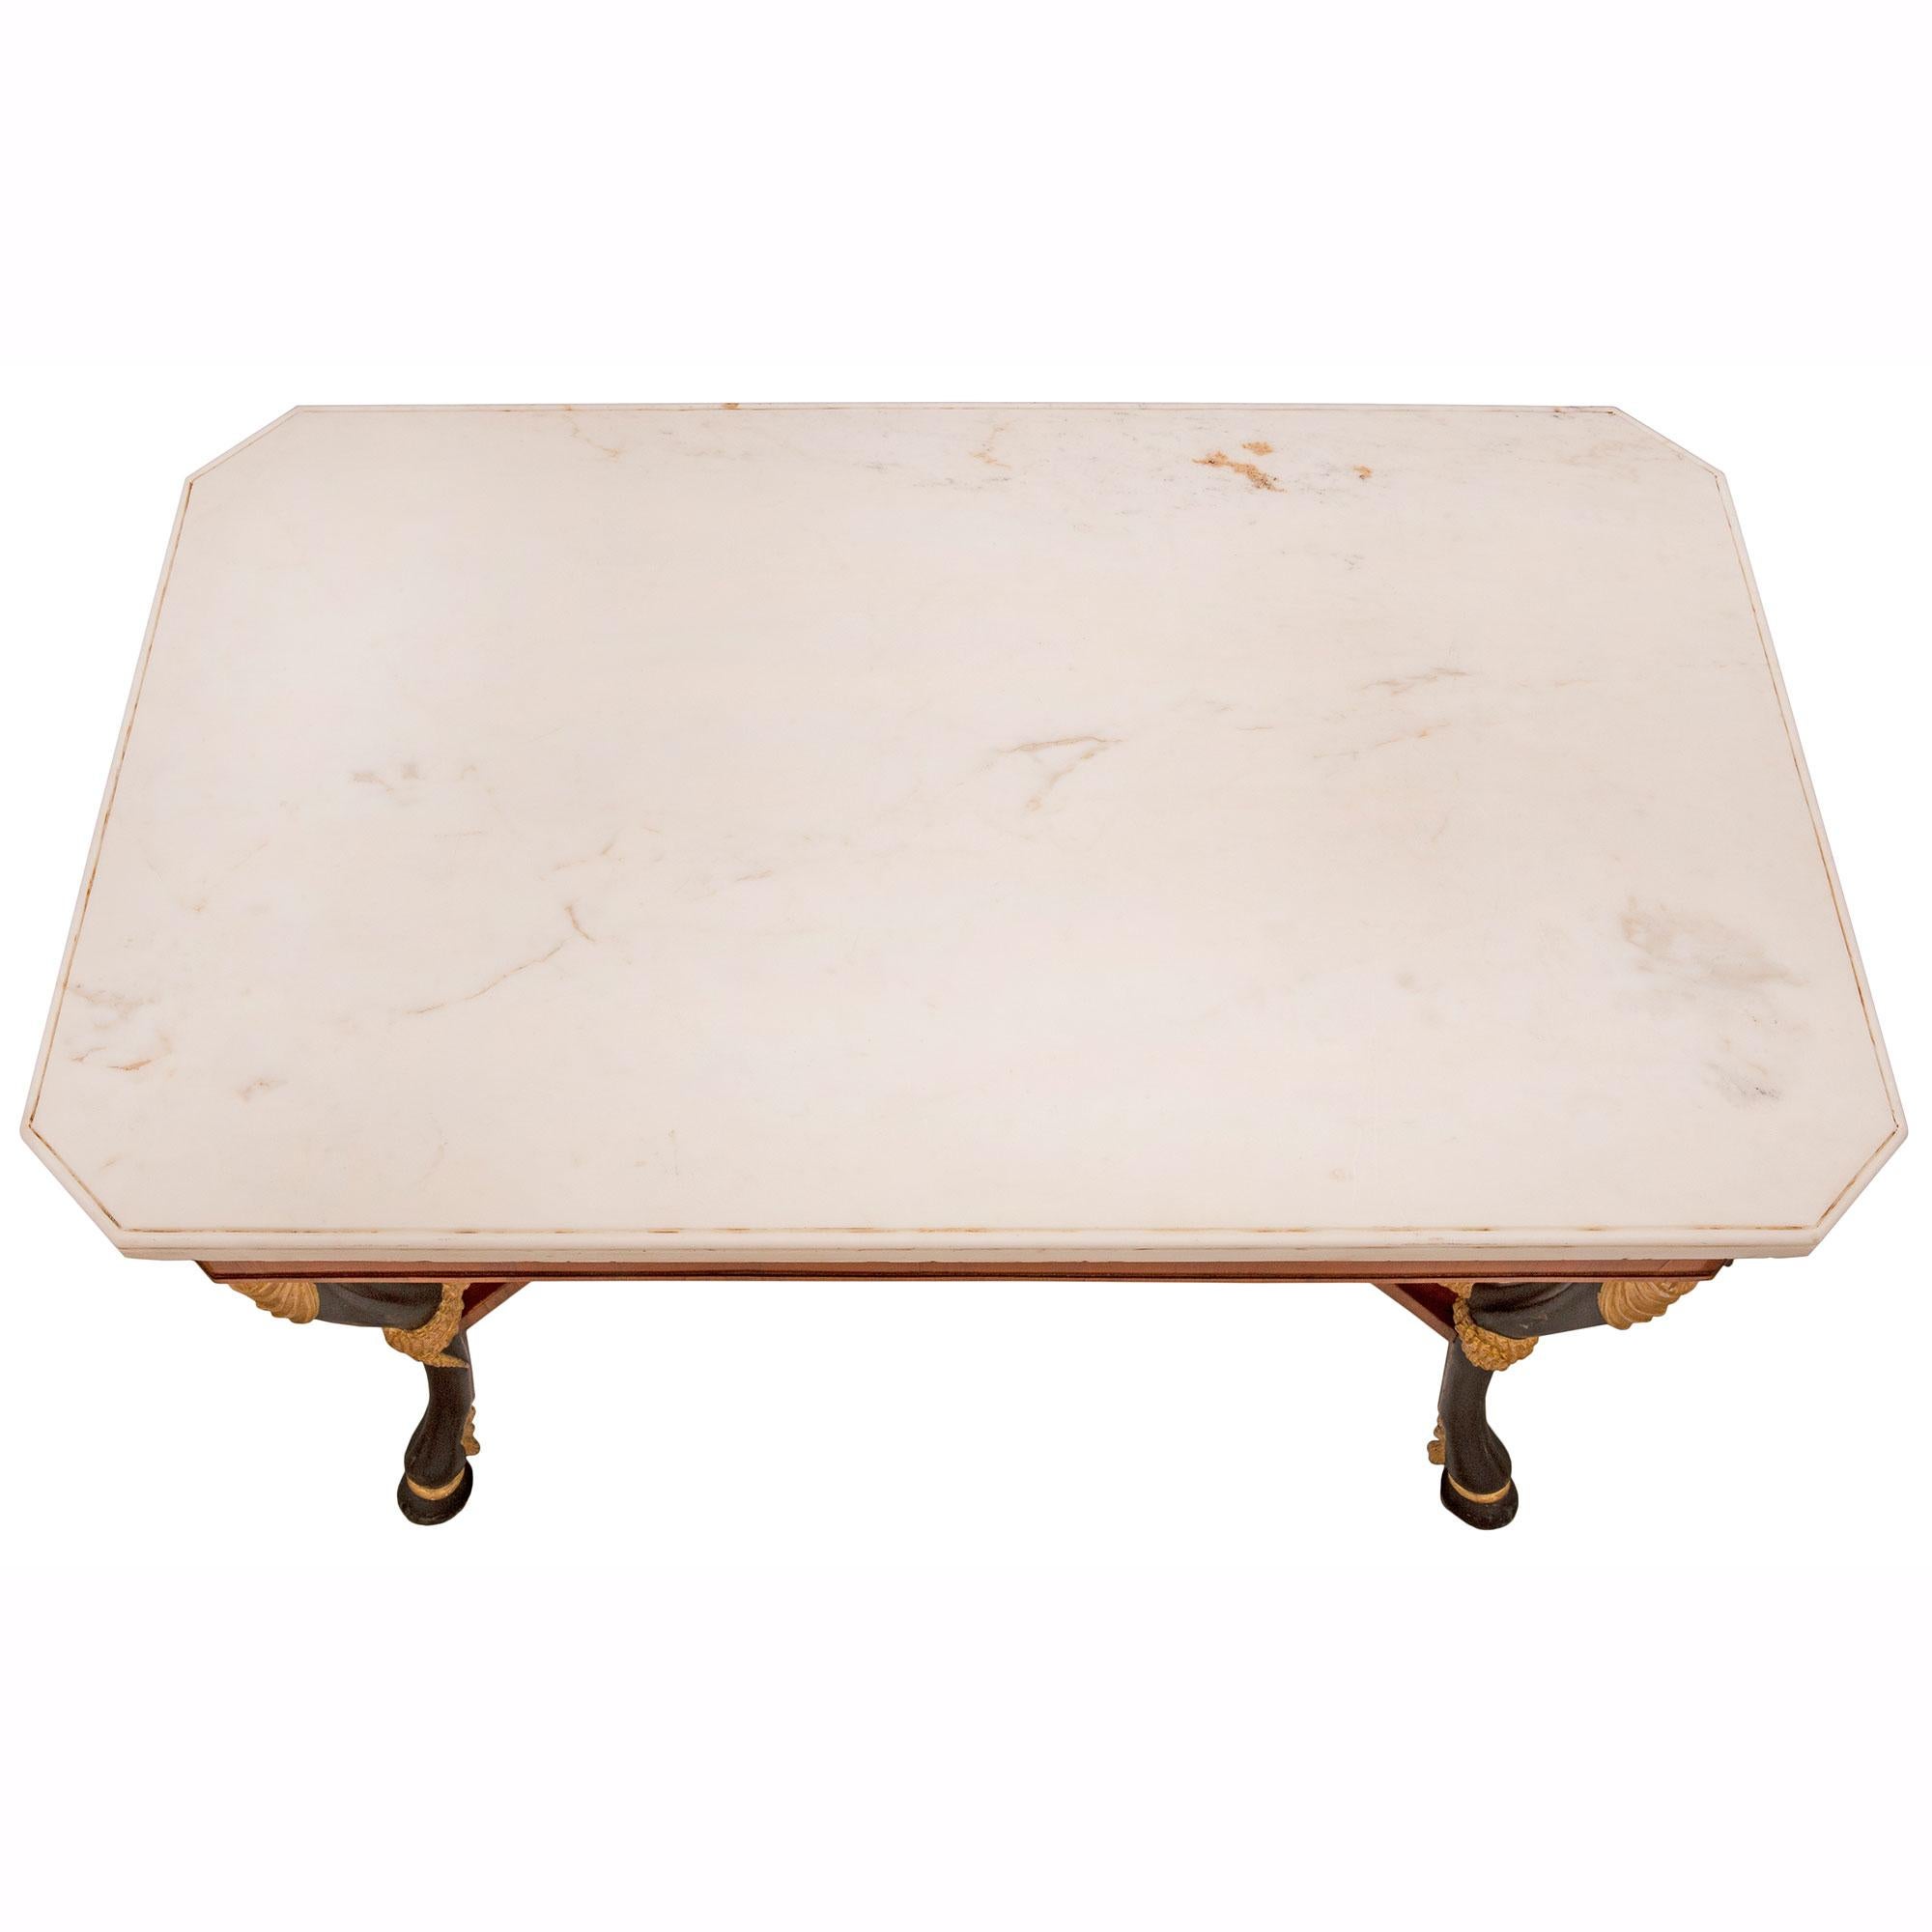 An impressive Italian early 19th century Neo-Classical st. walnut, polychrome, giltwood and white Carrara marble center table, from Naples. The rectangular table is raised by striking polychrome legs with most decorative hoof feet, and fine